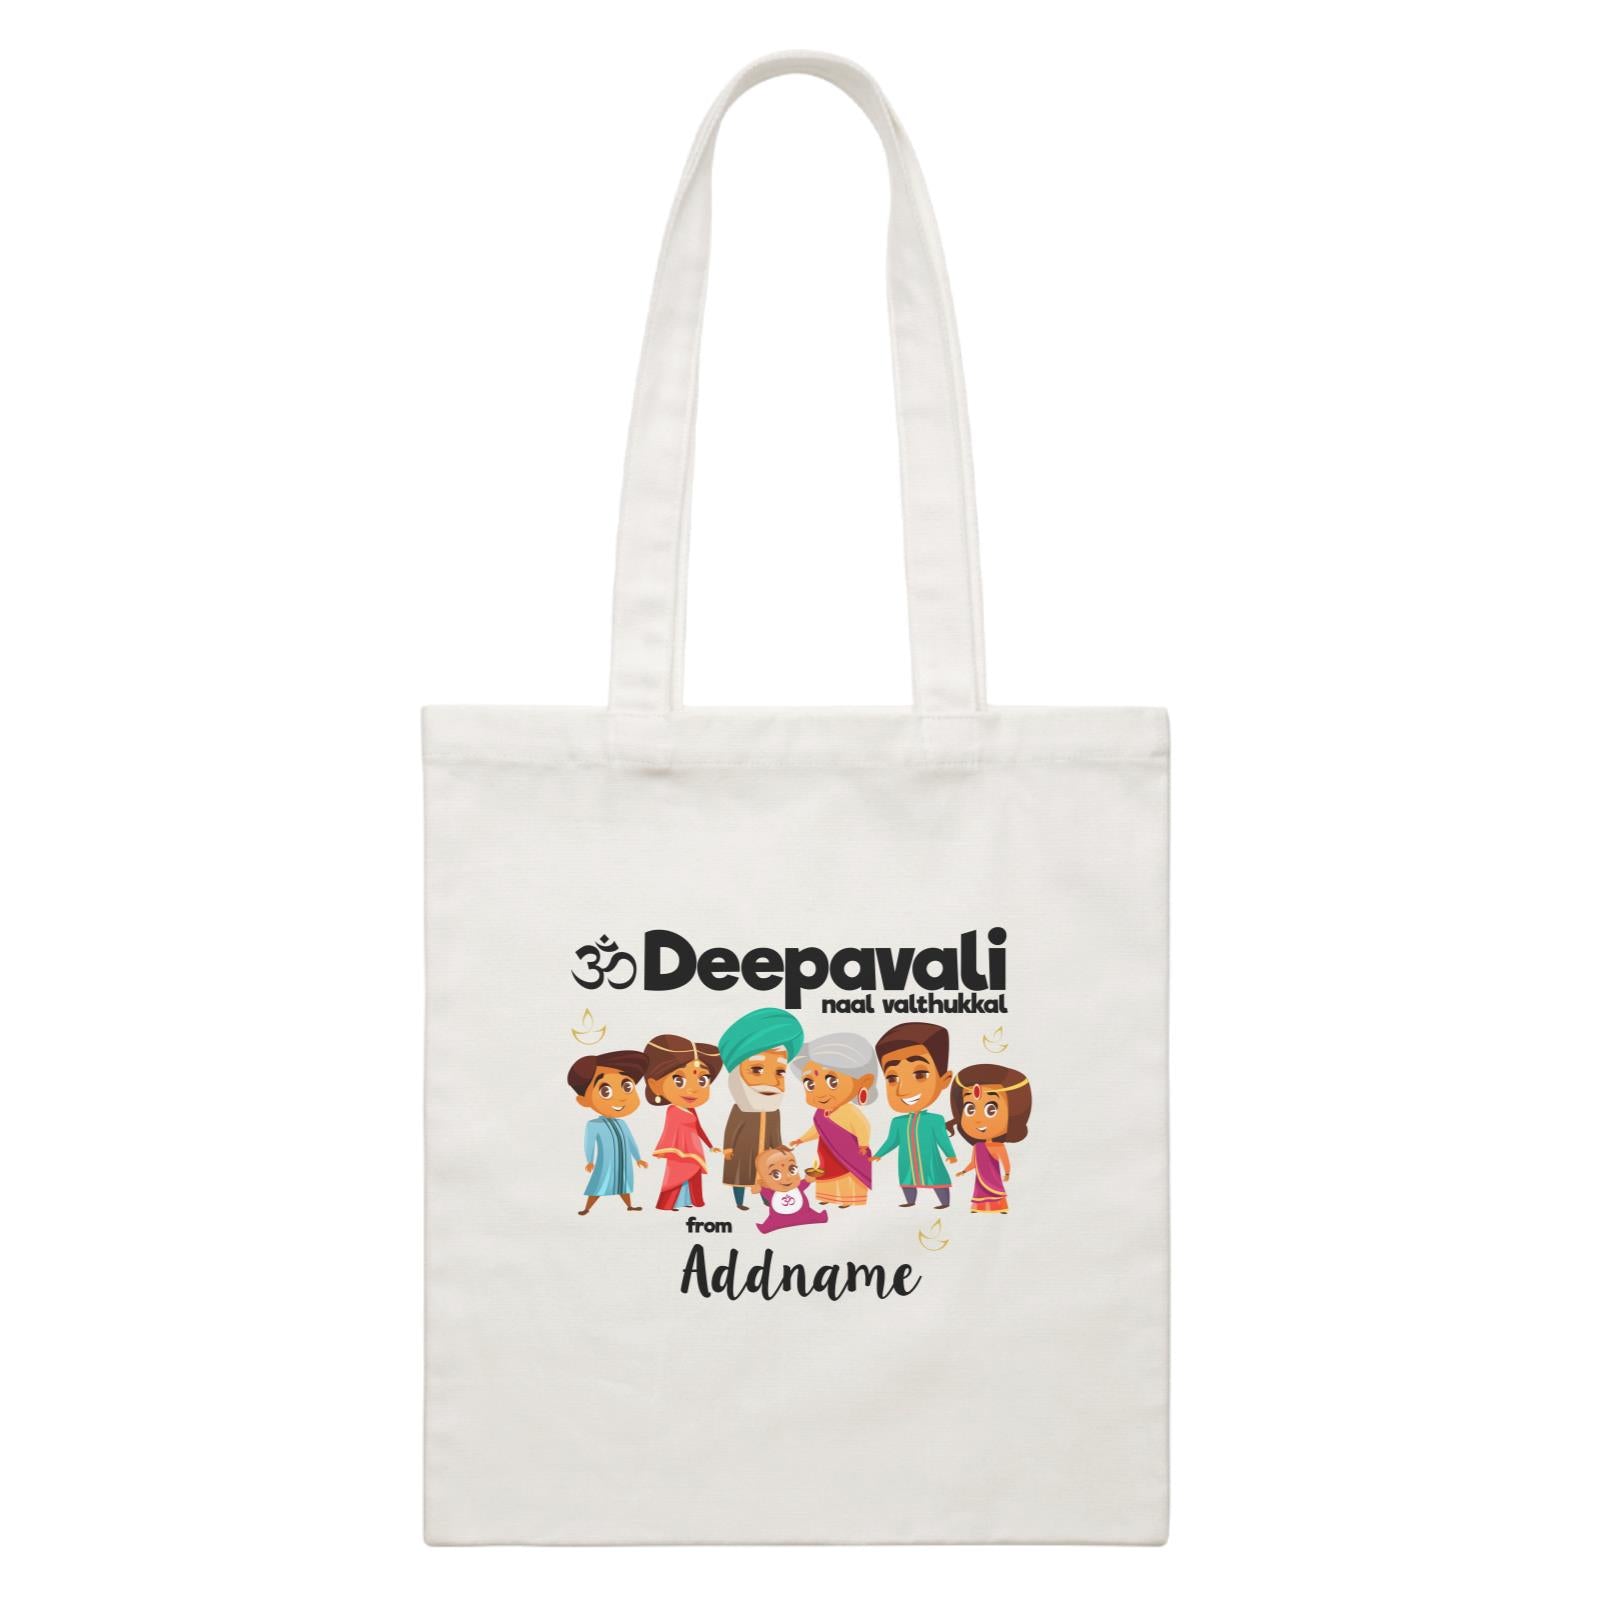 Cute Family Extended OM Deepavali From Addname White Canvas Bag